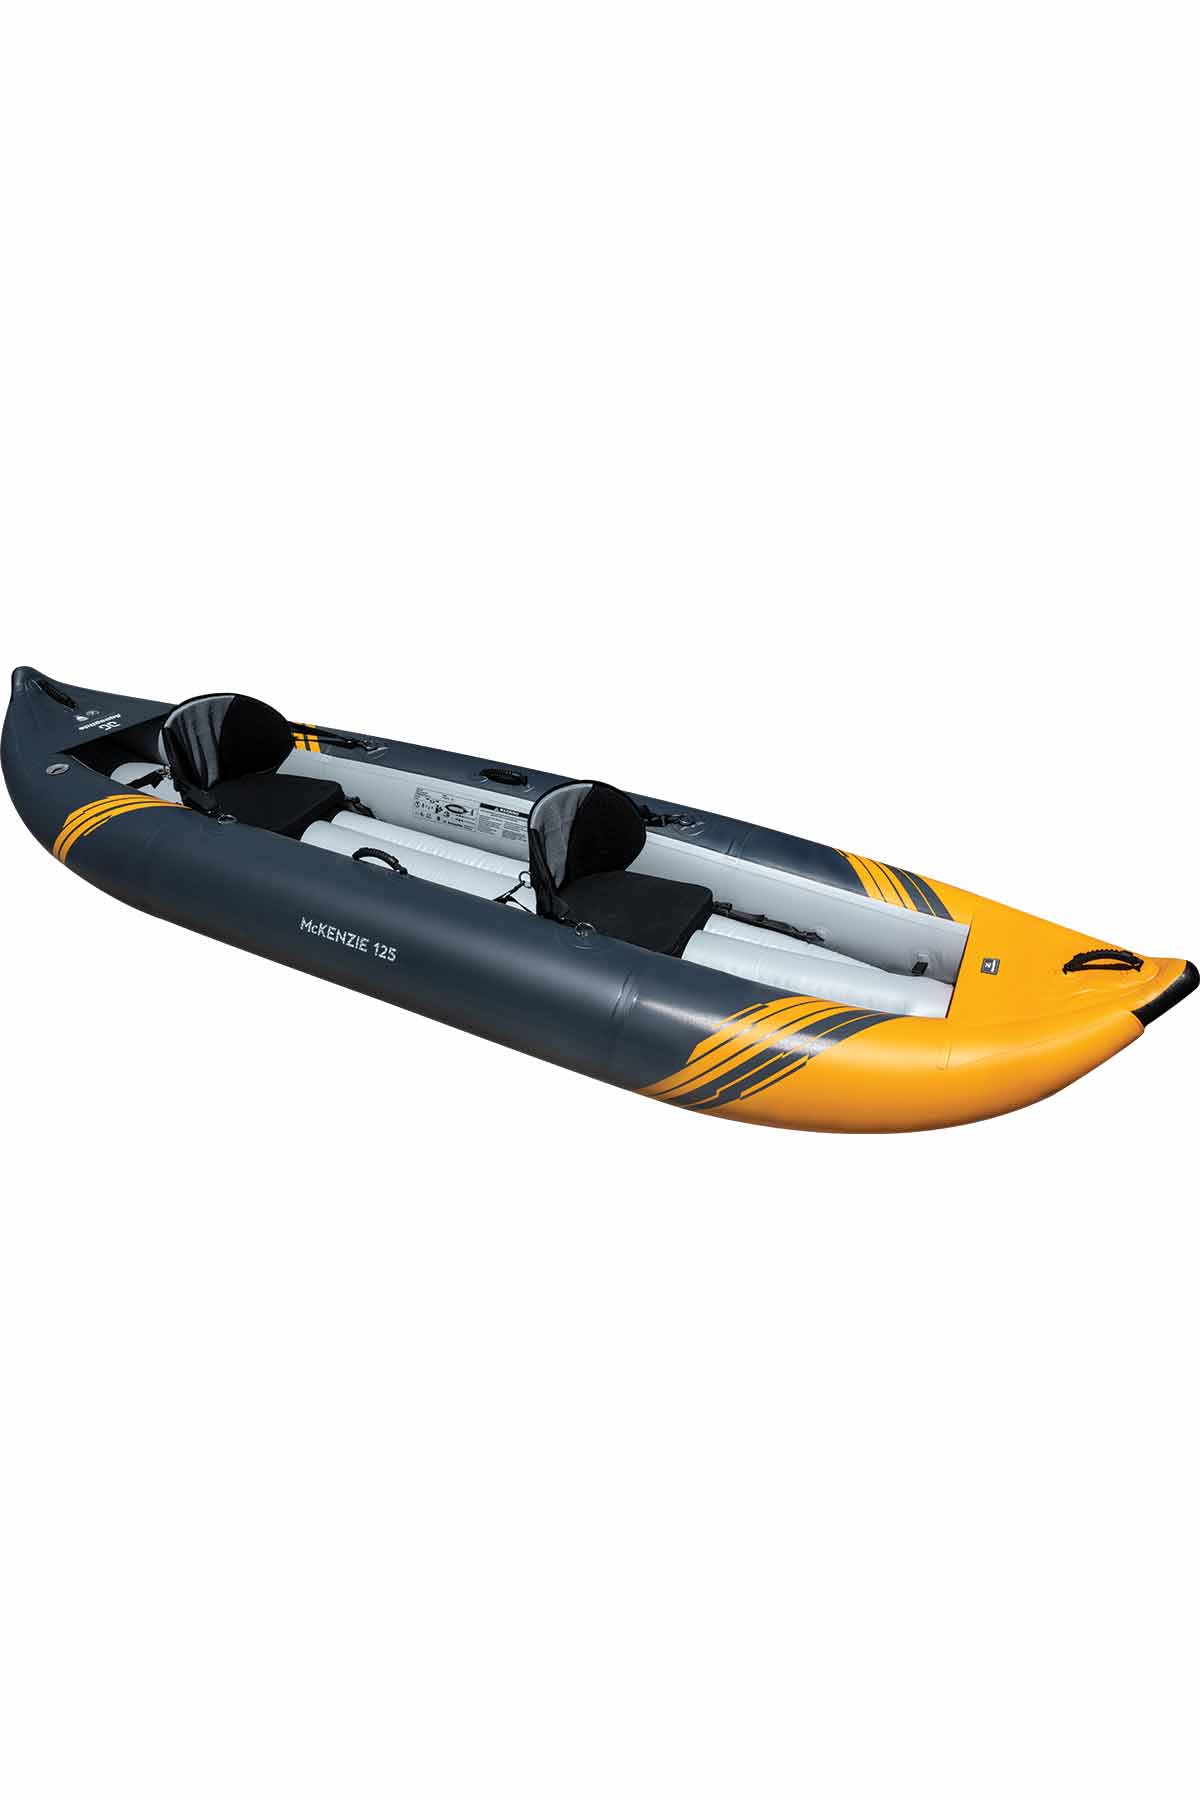 Aquaglide McKenzie 125 Whitewater Inflatable Kayak Angled Side View